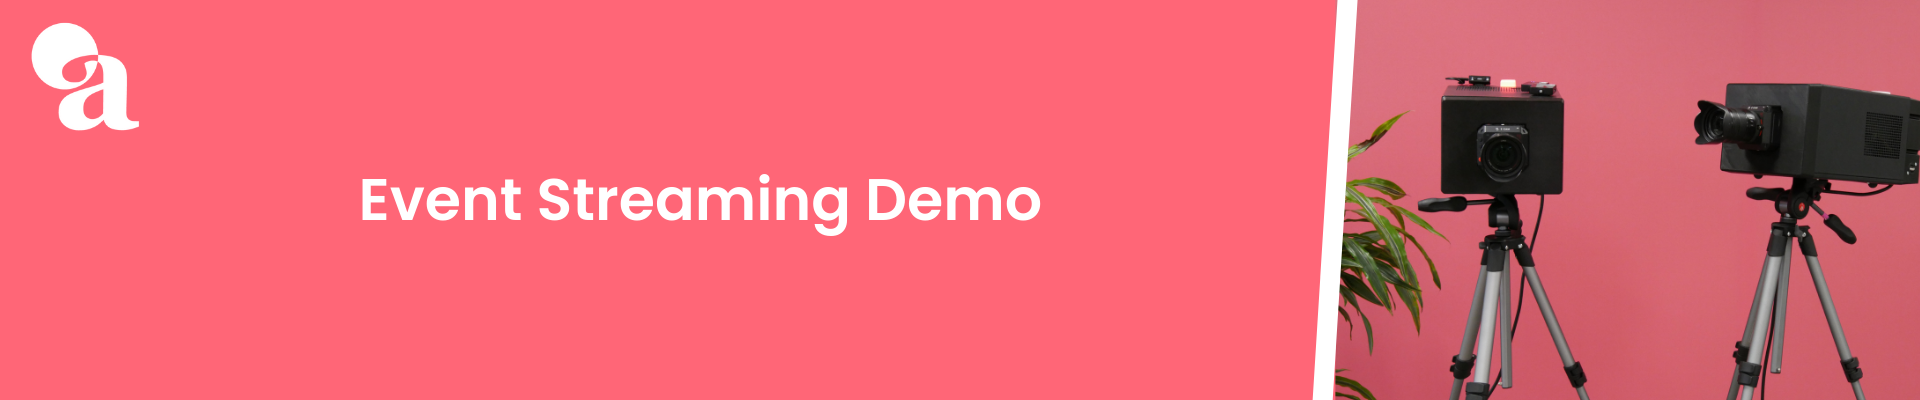 Event Streaming demo